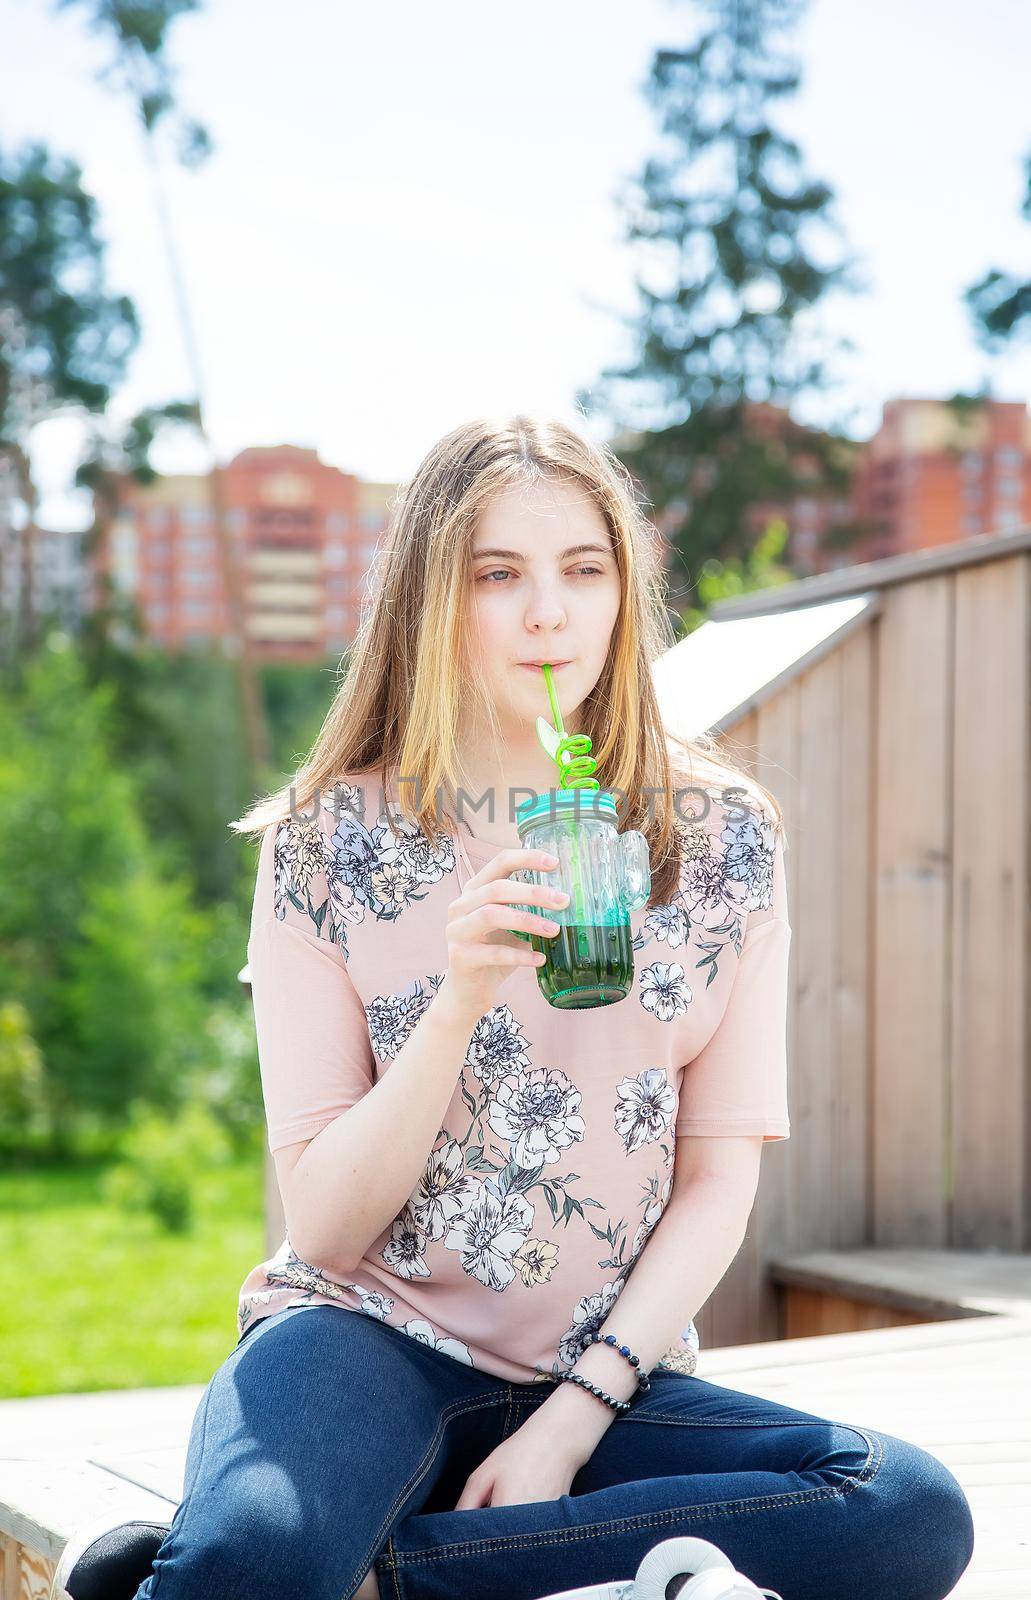 A young girl of 20 years old Caucasian appearance enjoys the sun and weather and drinks smoothies from a large glass while sitting on a wooden podium in the park on a summer day.